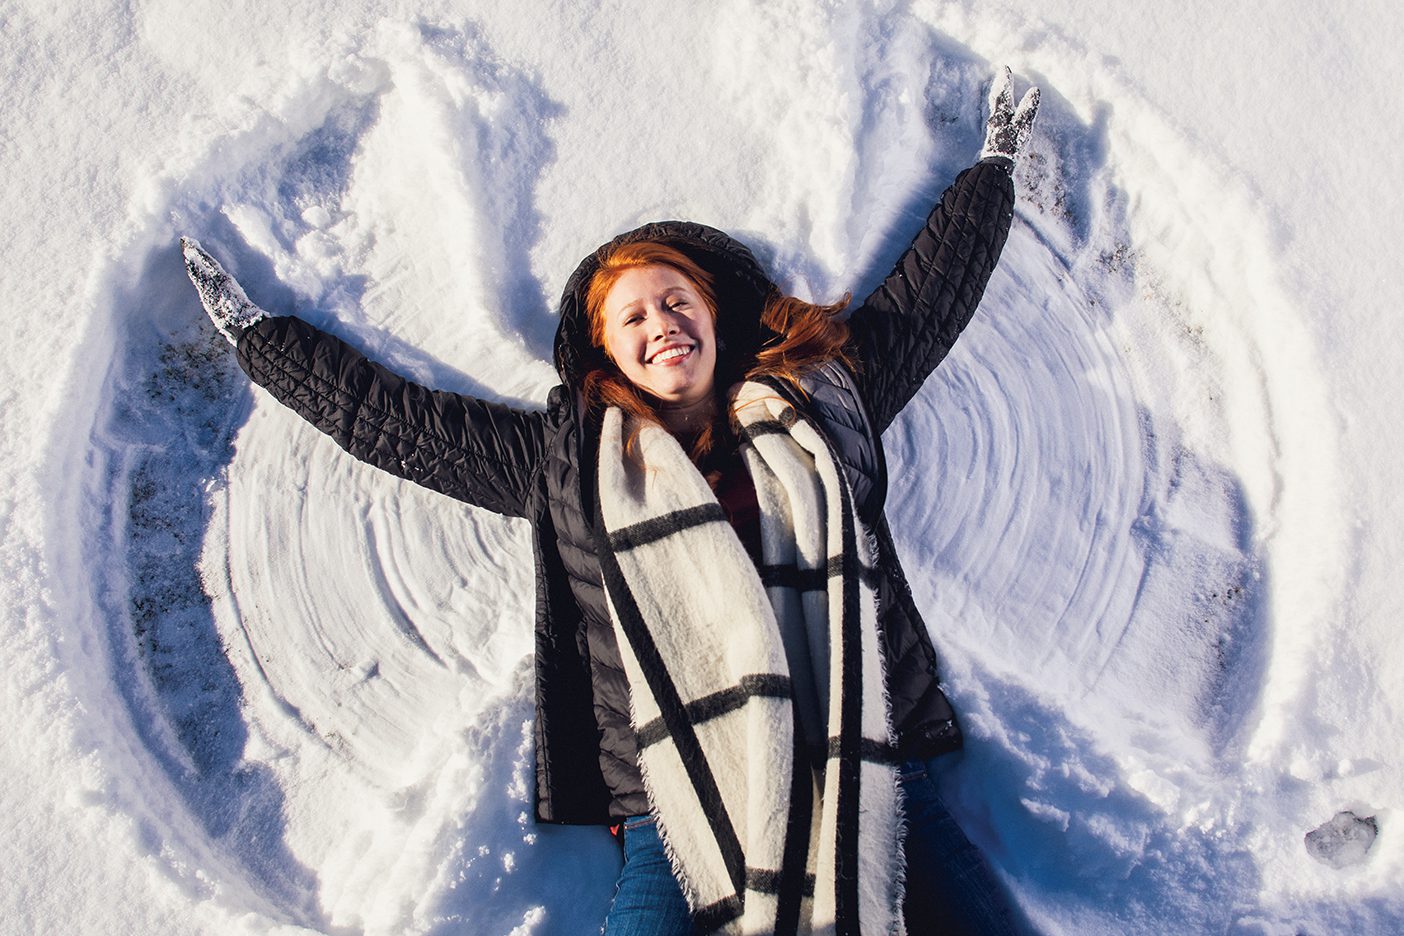 Lying in the snow, Emma Stanford makes a snow angel.